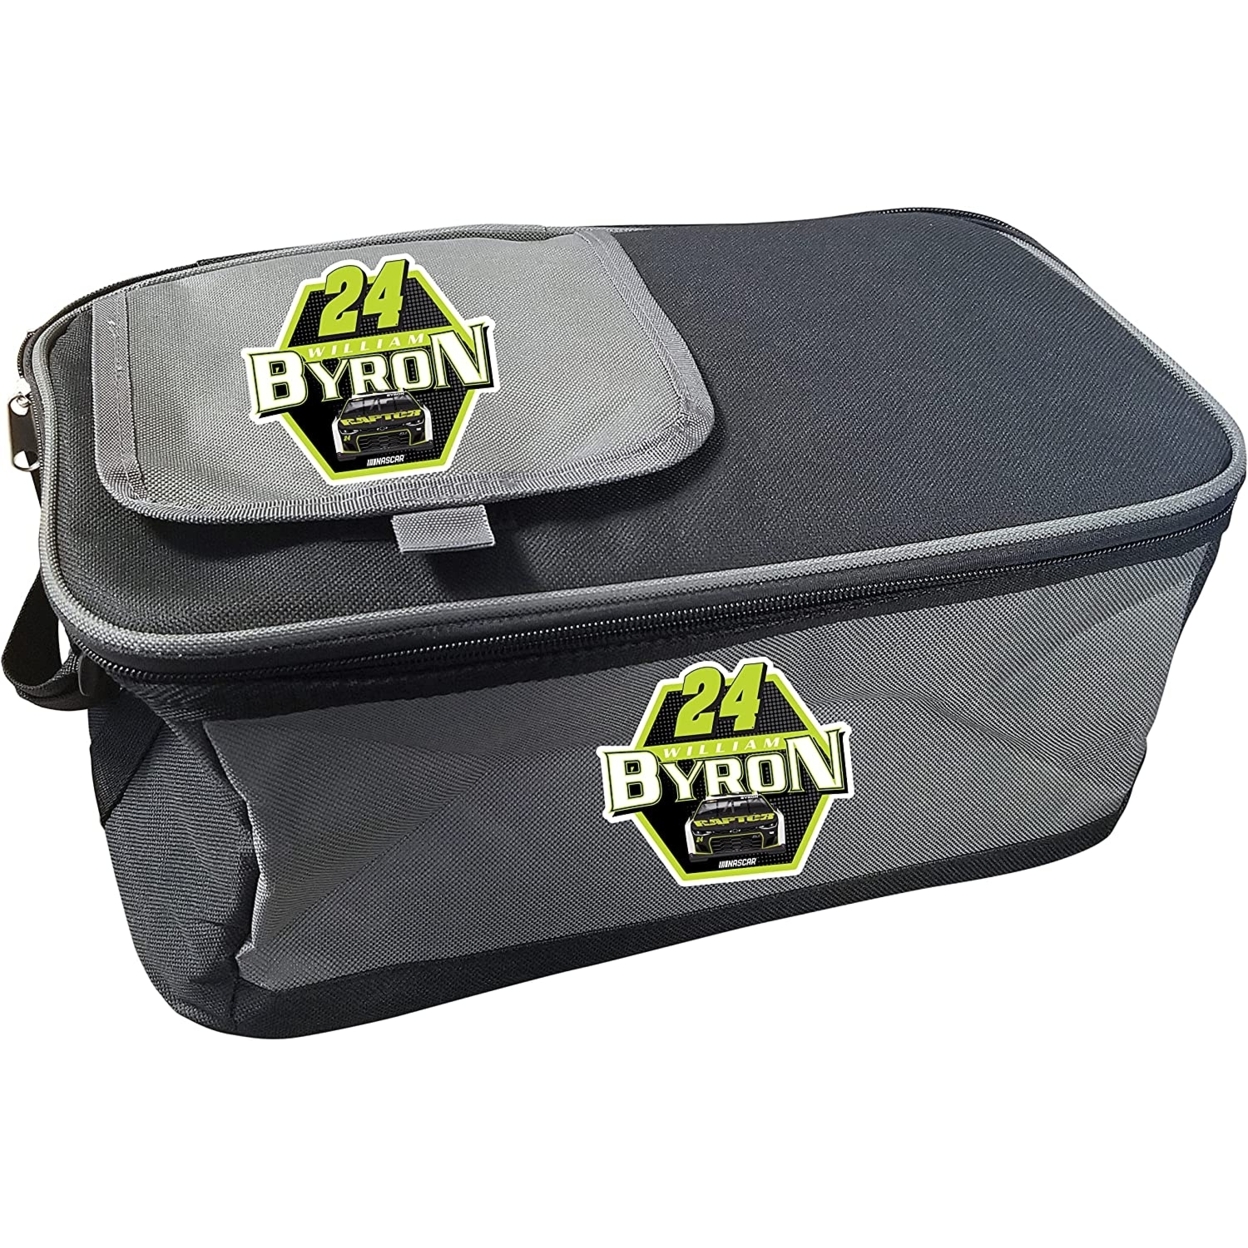 #24 William Byron Officially Licensed 9 Pack Cooler